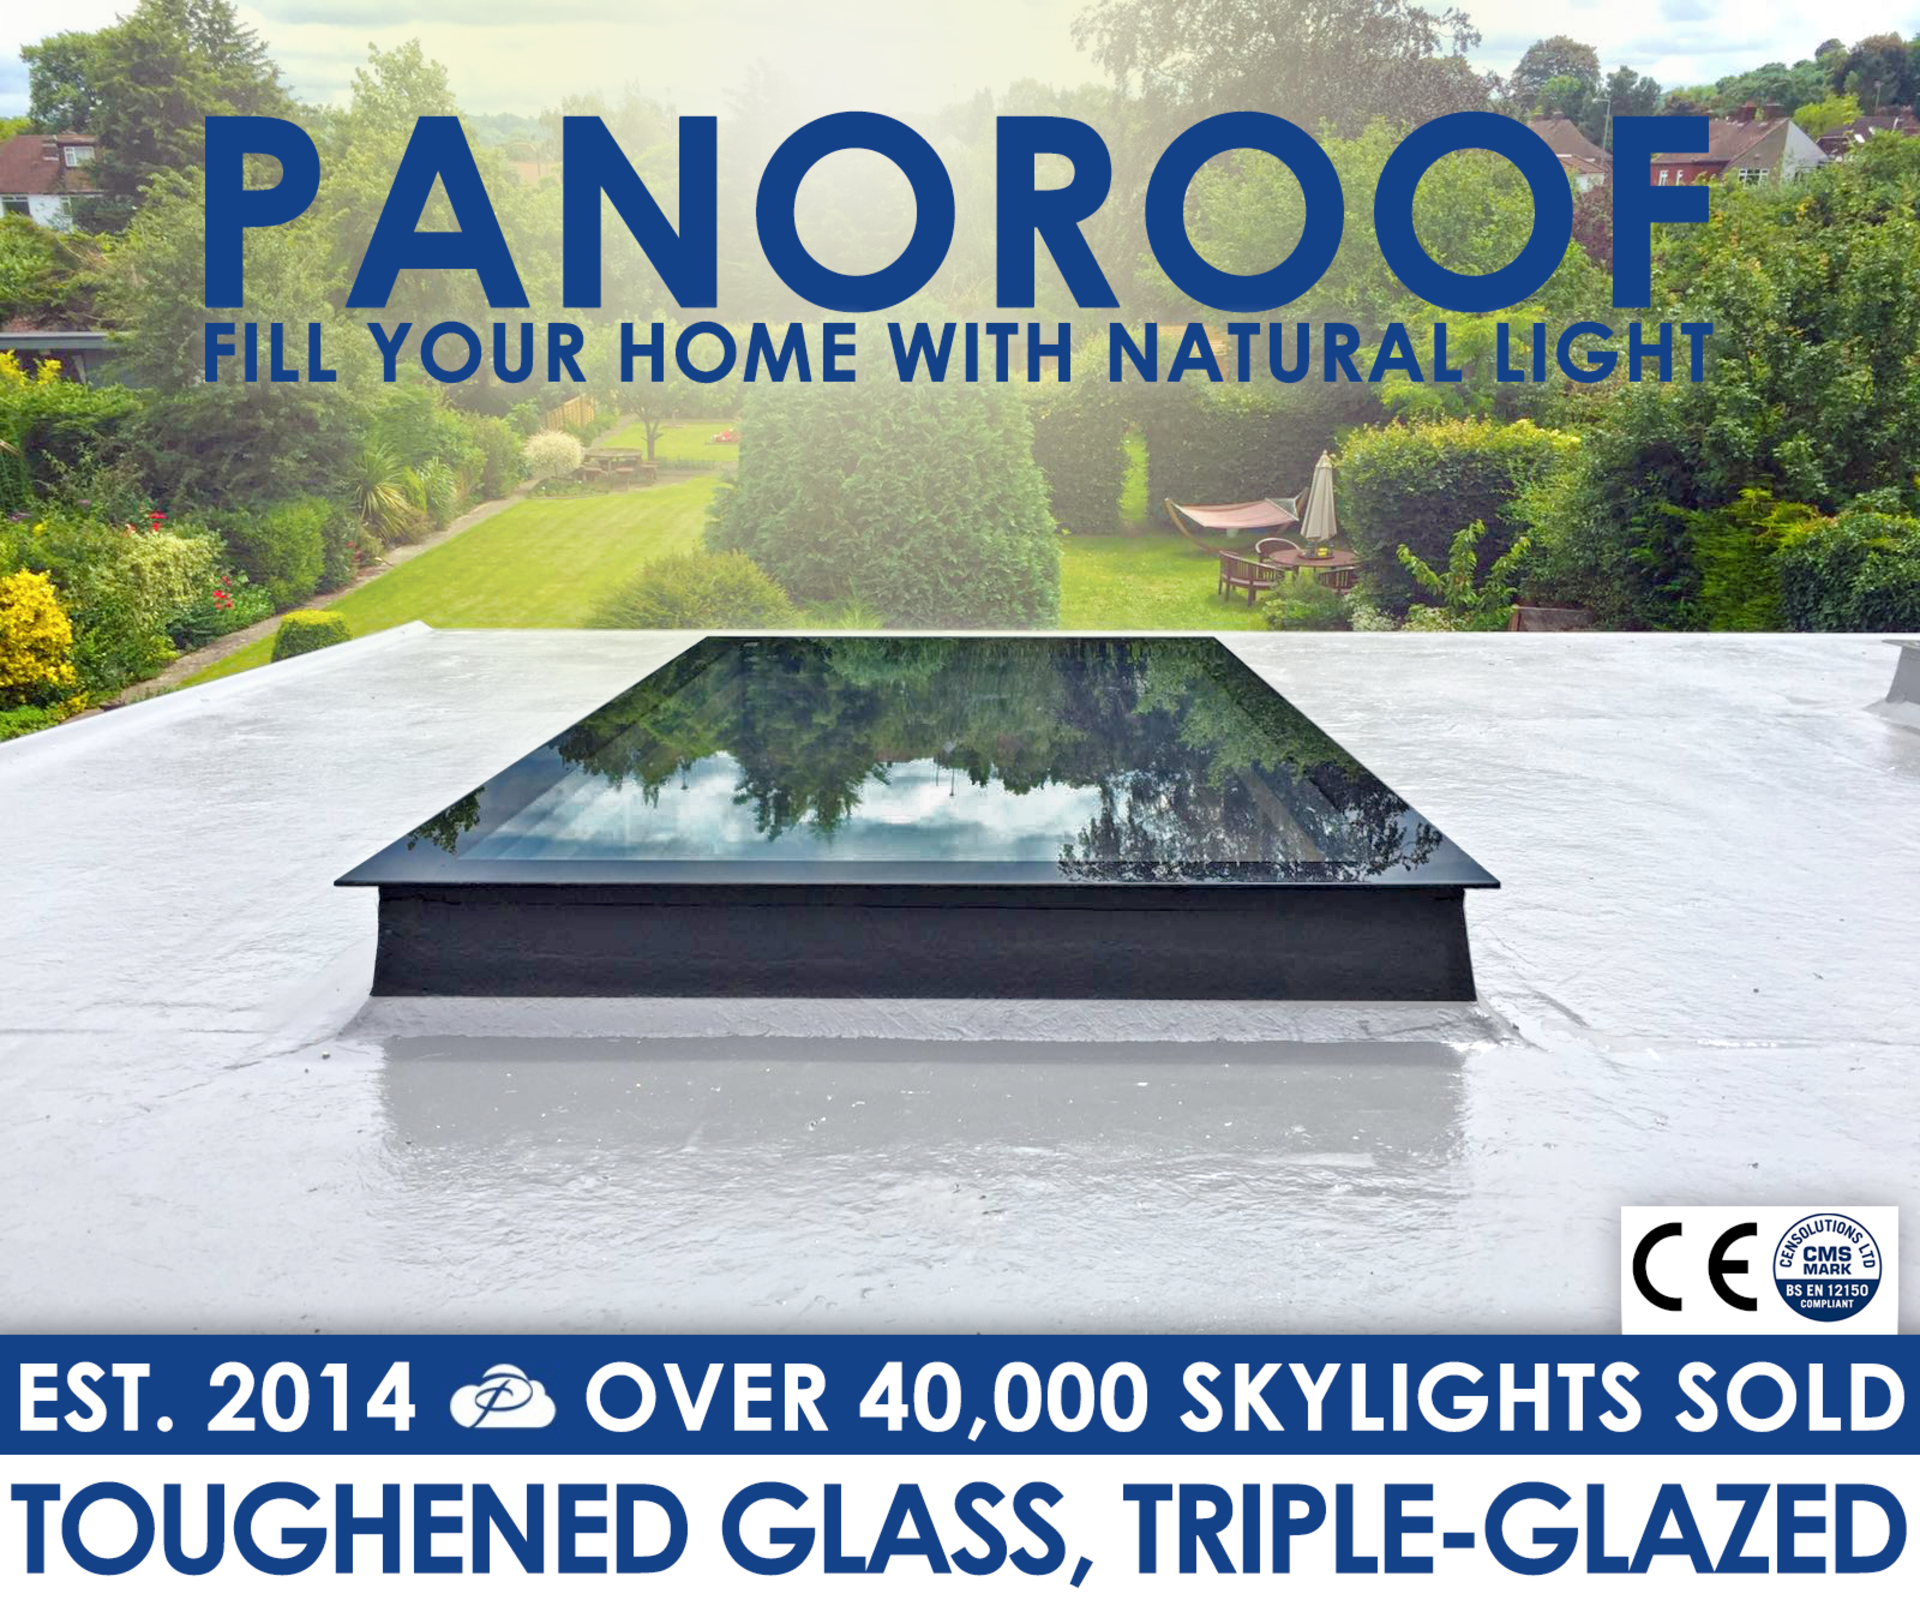 "Panoroof Triple Glazed Self Cleaning , 400x1500mm (inside Size Visable glass area) Seamless Glass